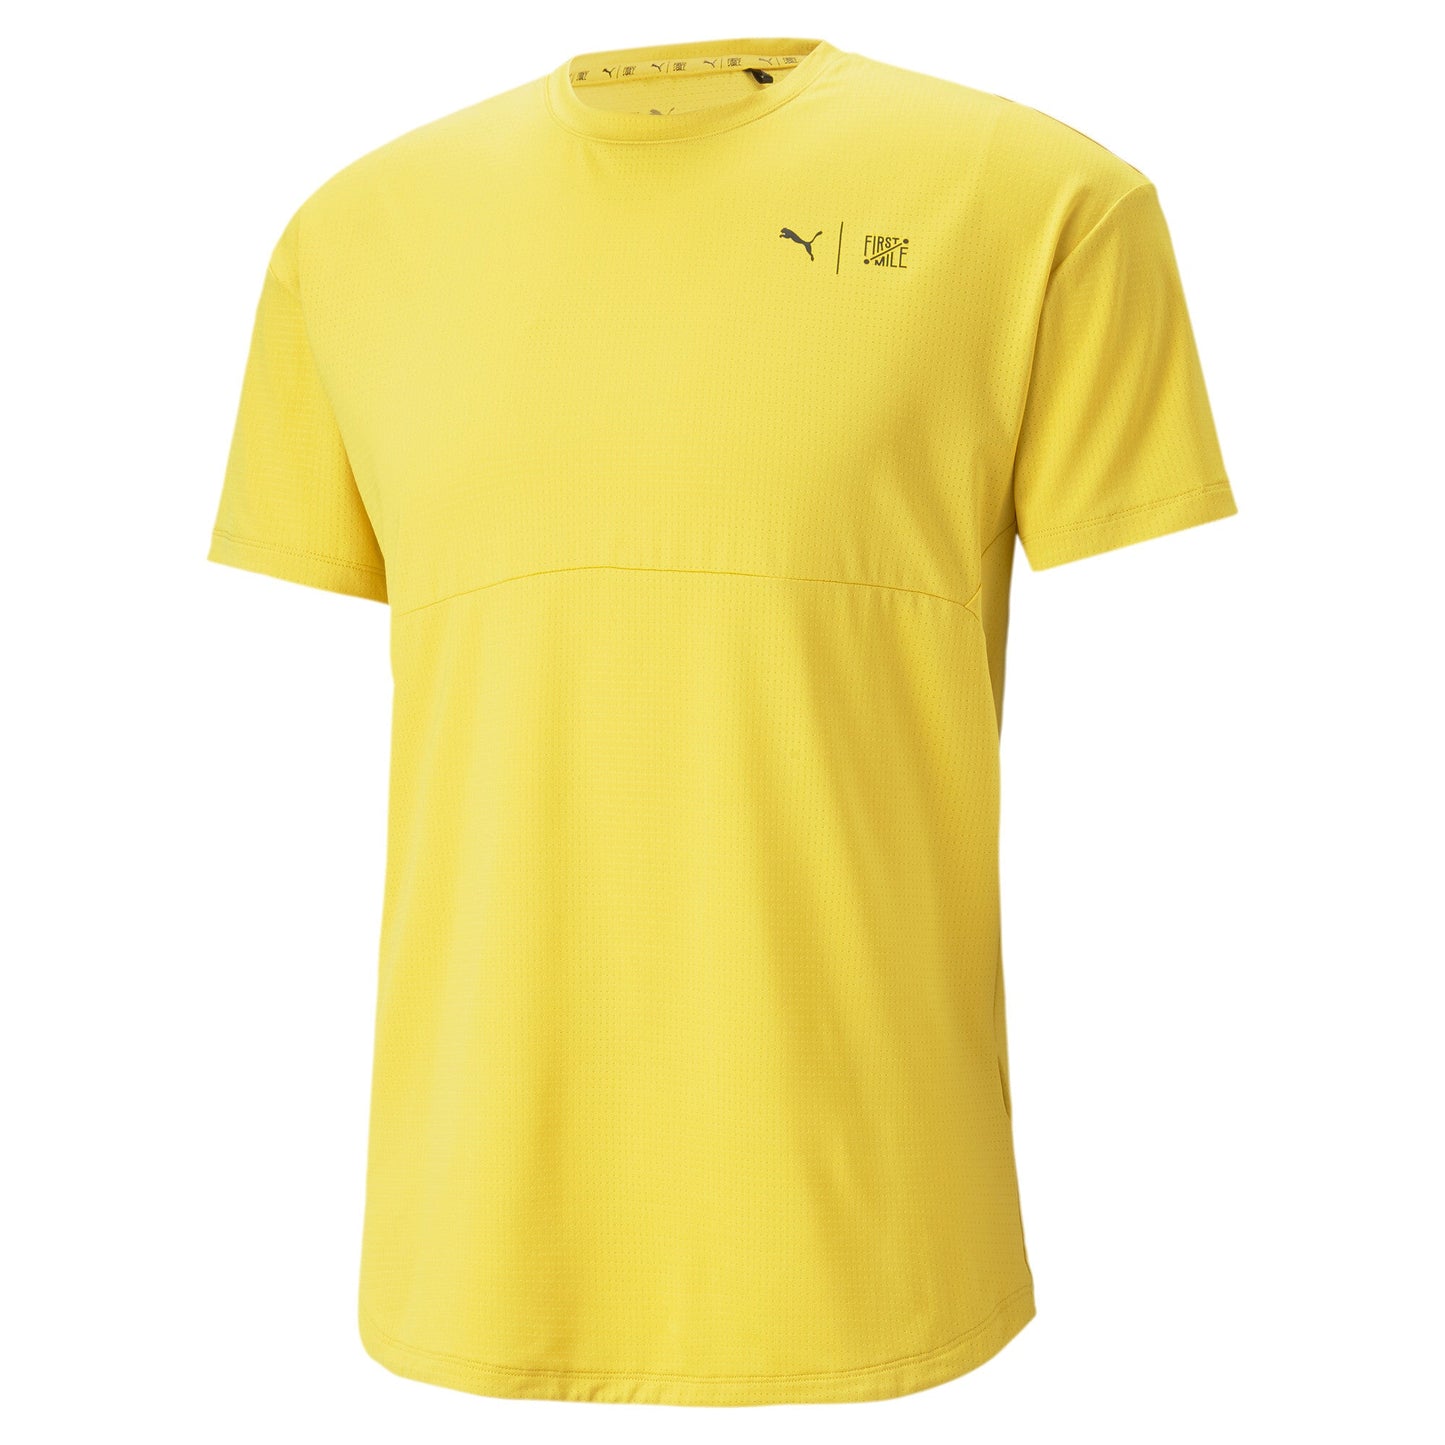 M First Mile Commercial Tee